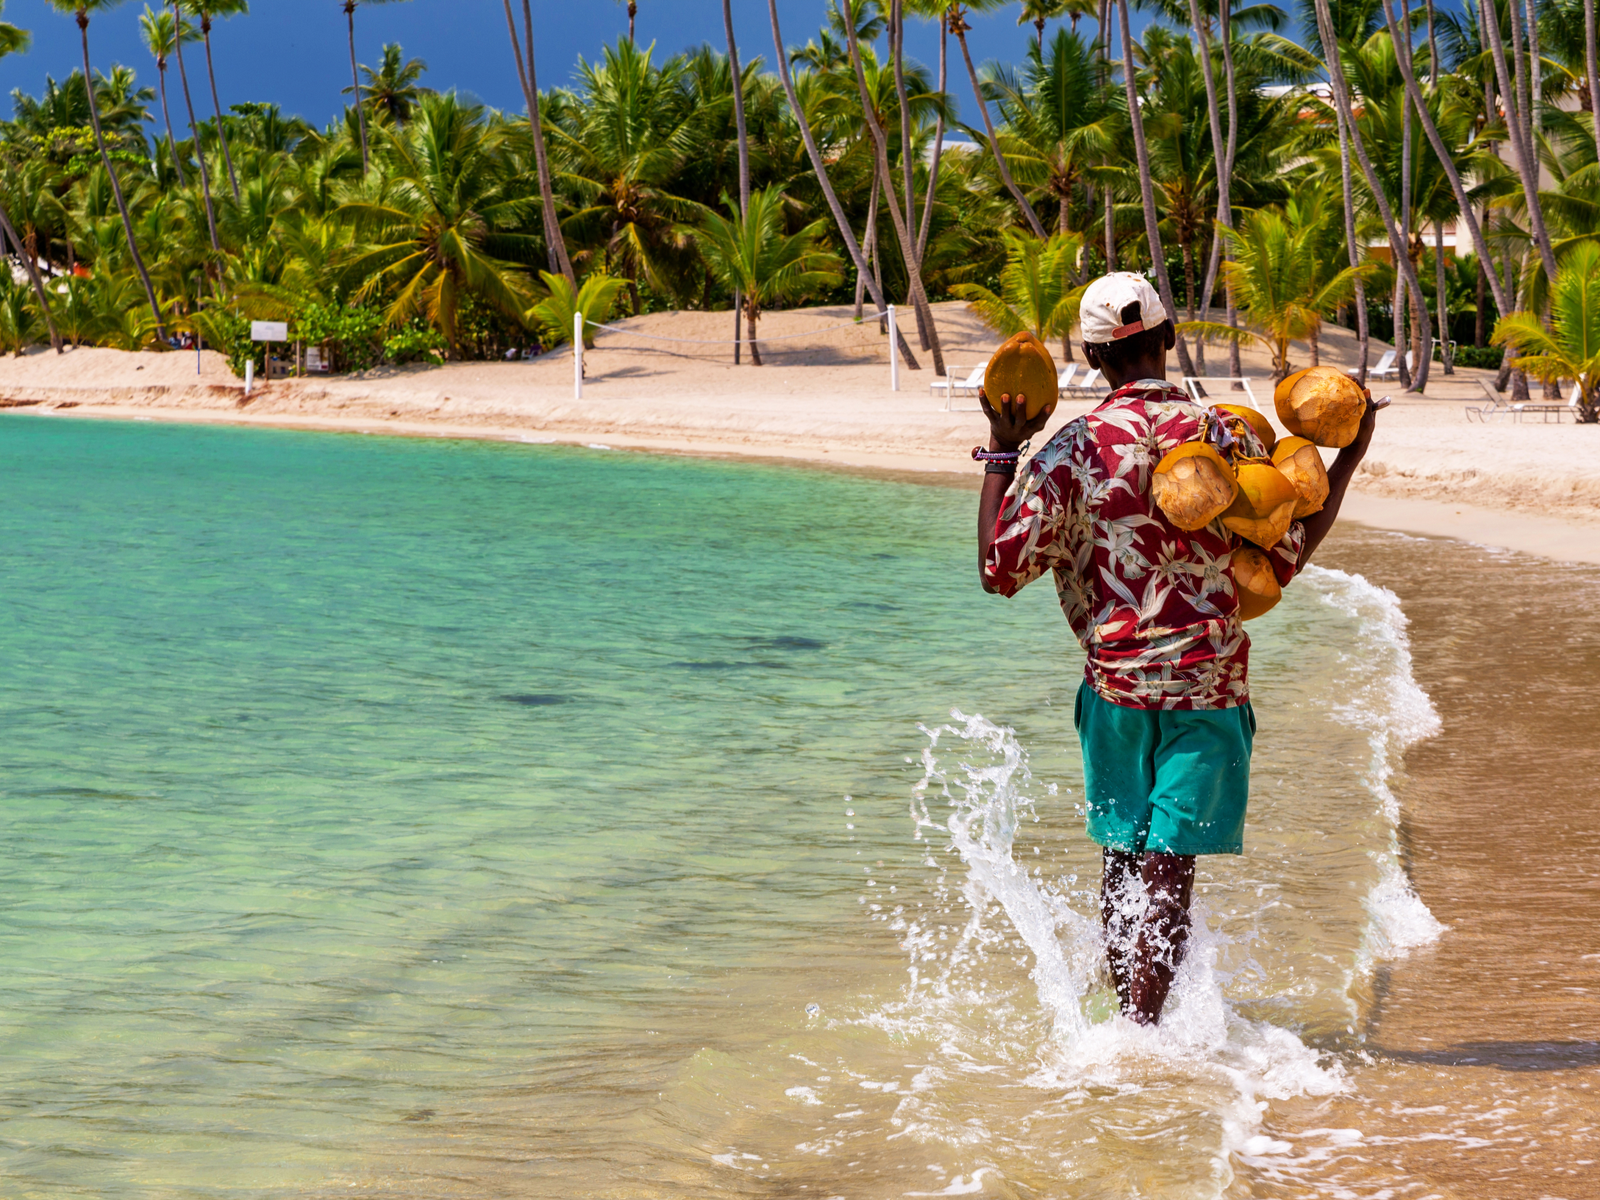 A man, wearing a cap and a beach shirt, carrying coconuts on his shoulders and walking towards a row of palm trees at Playa Juan Dolio, known as one of the best beaches in the Dominican Republic